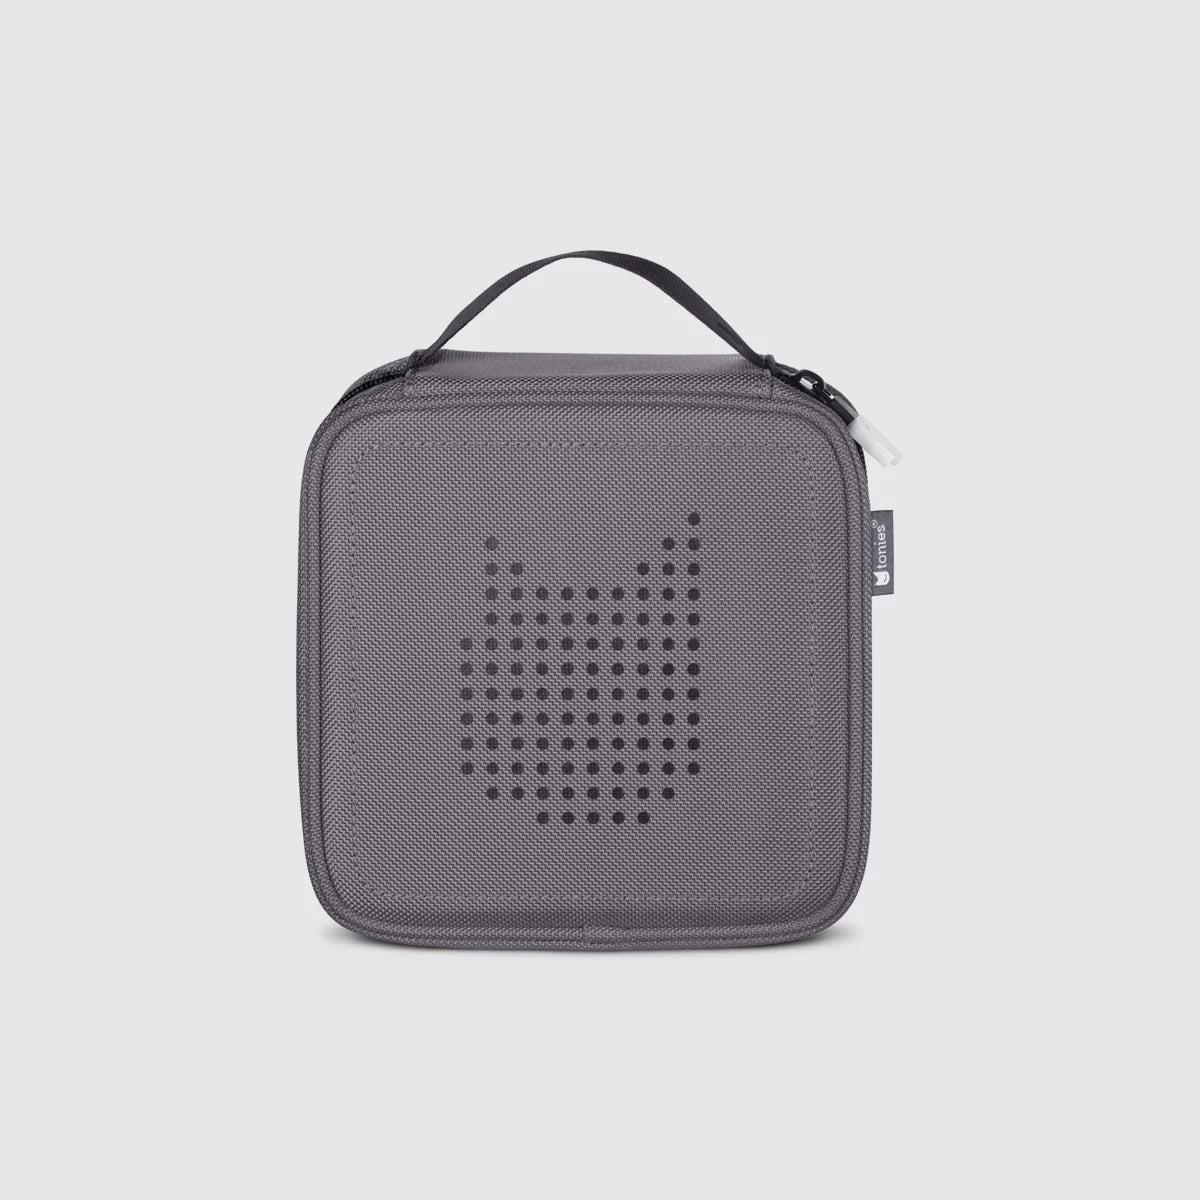 Carrying Case- Grey by Tonies #10001203